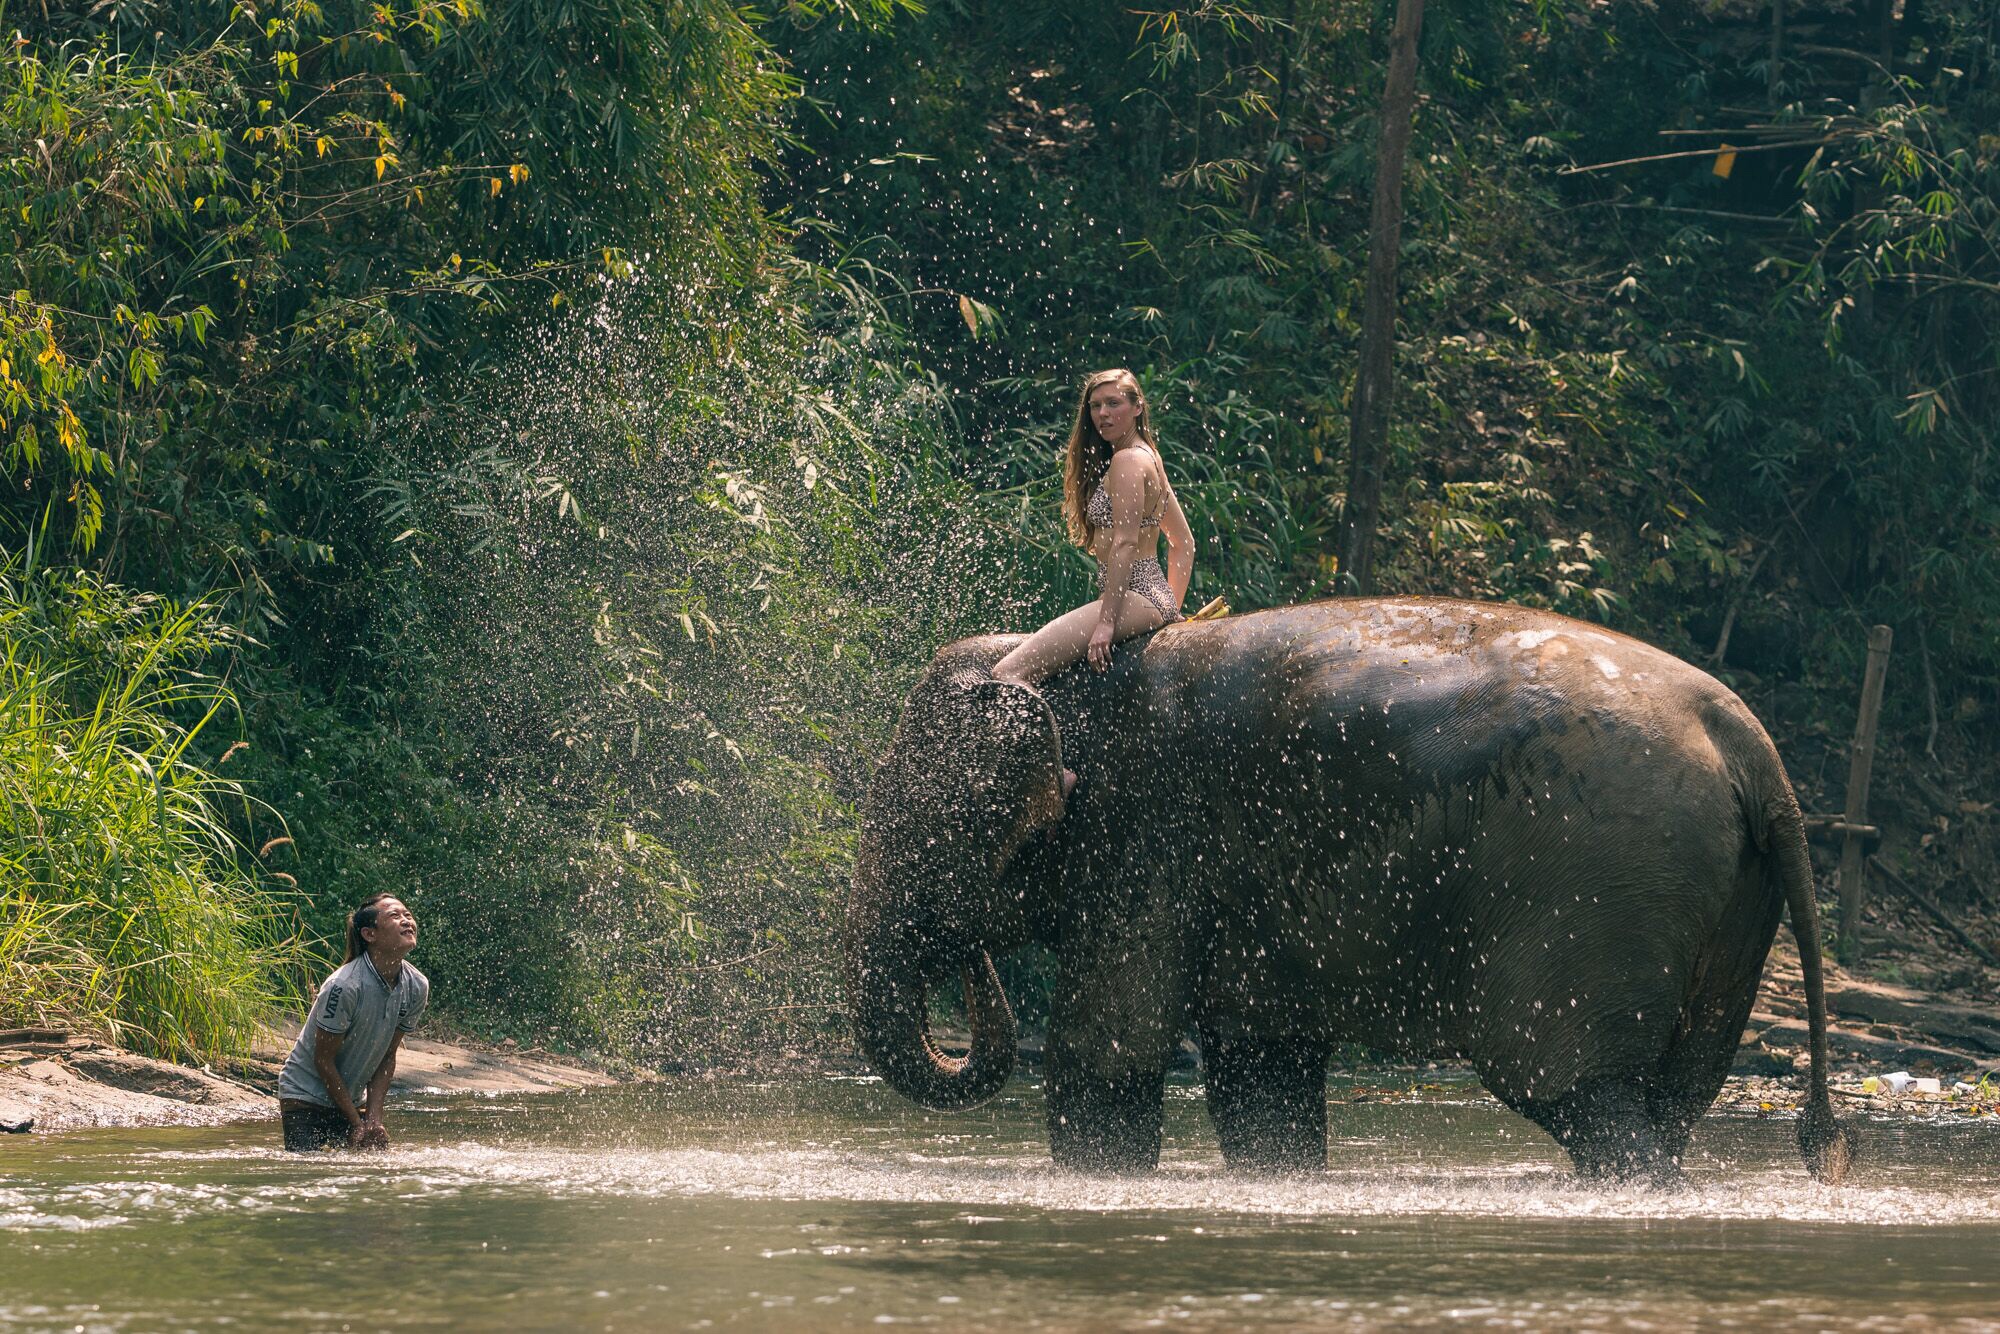 IS IT EVER OK TO RIDE AN ELEPHANT?